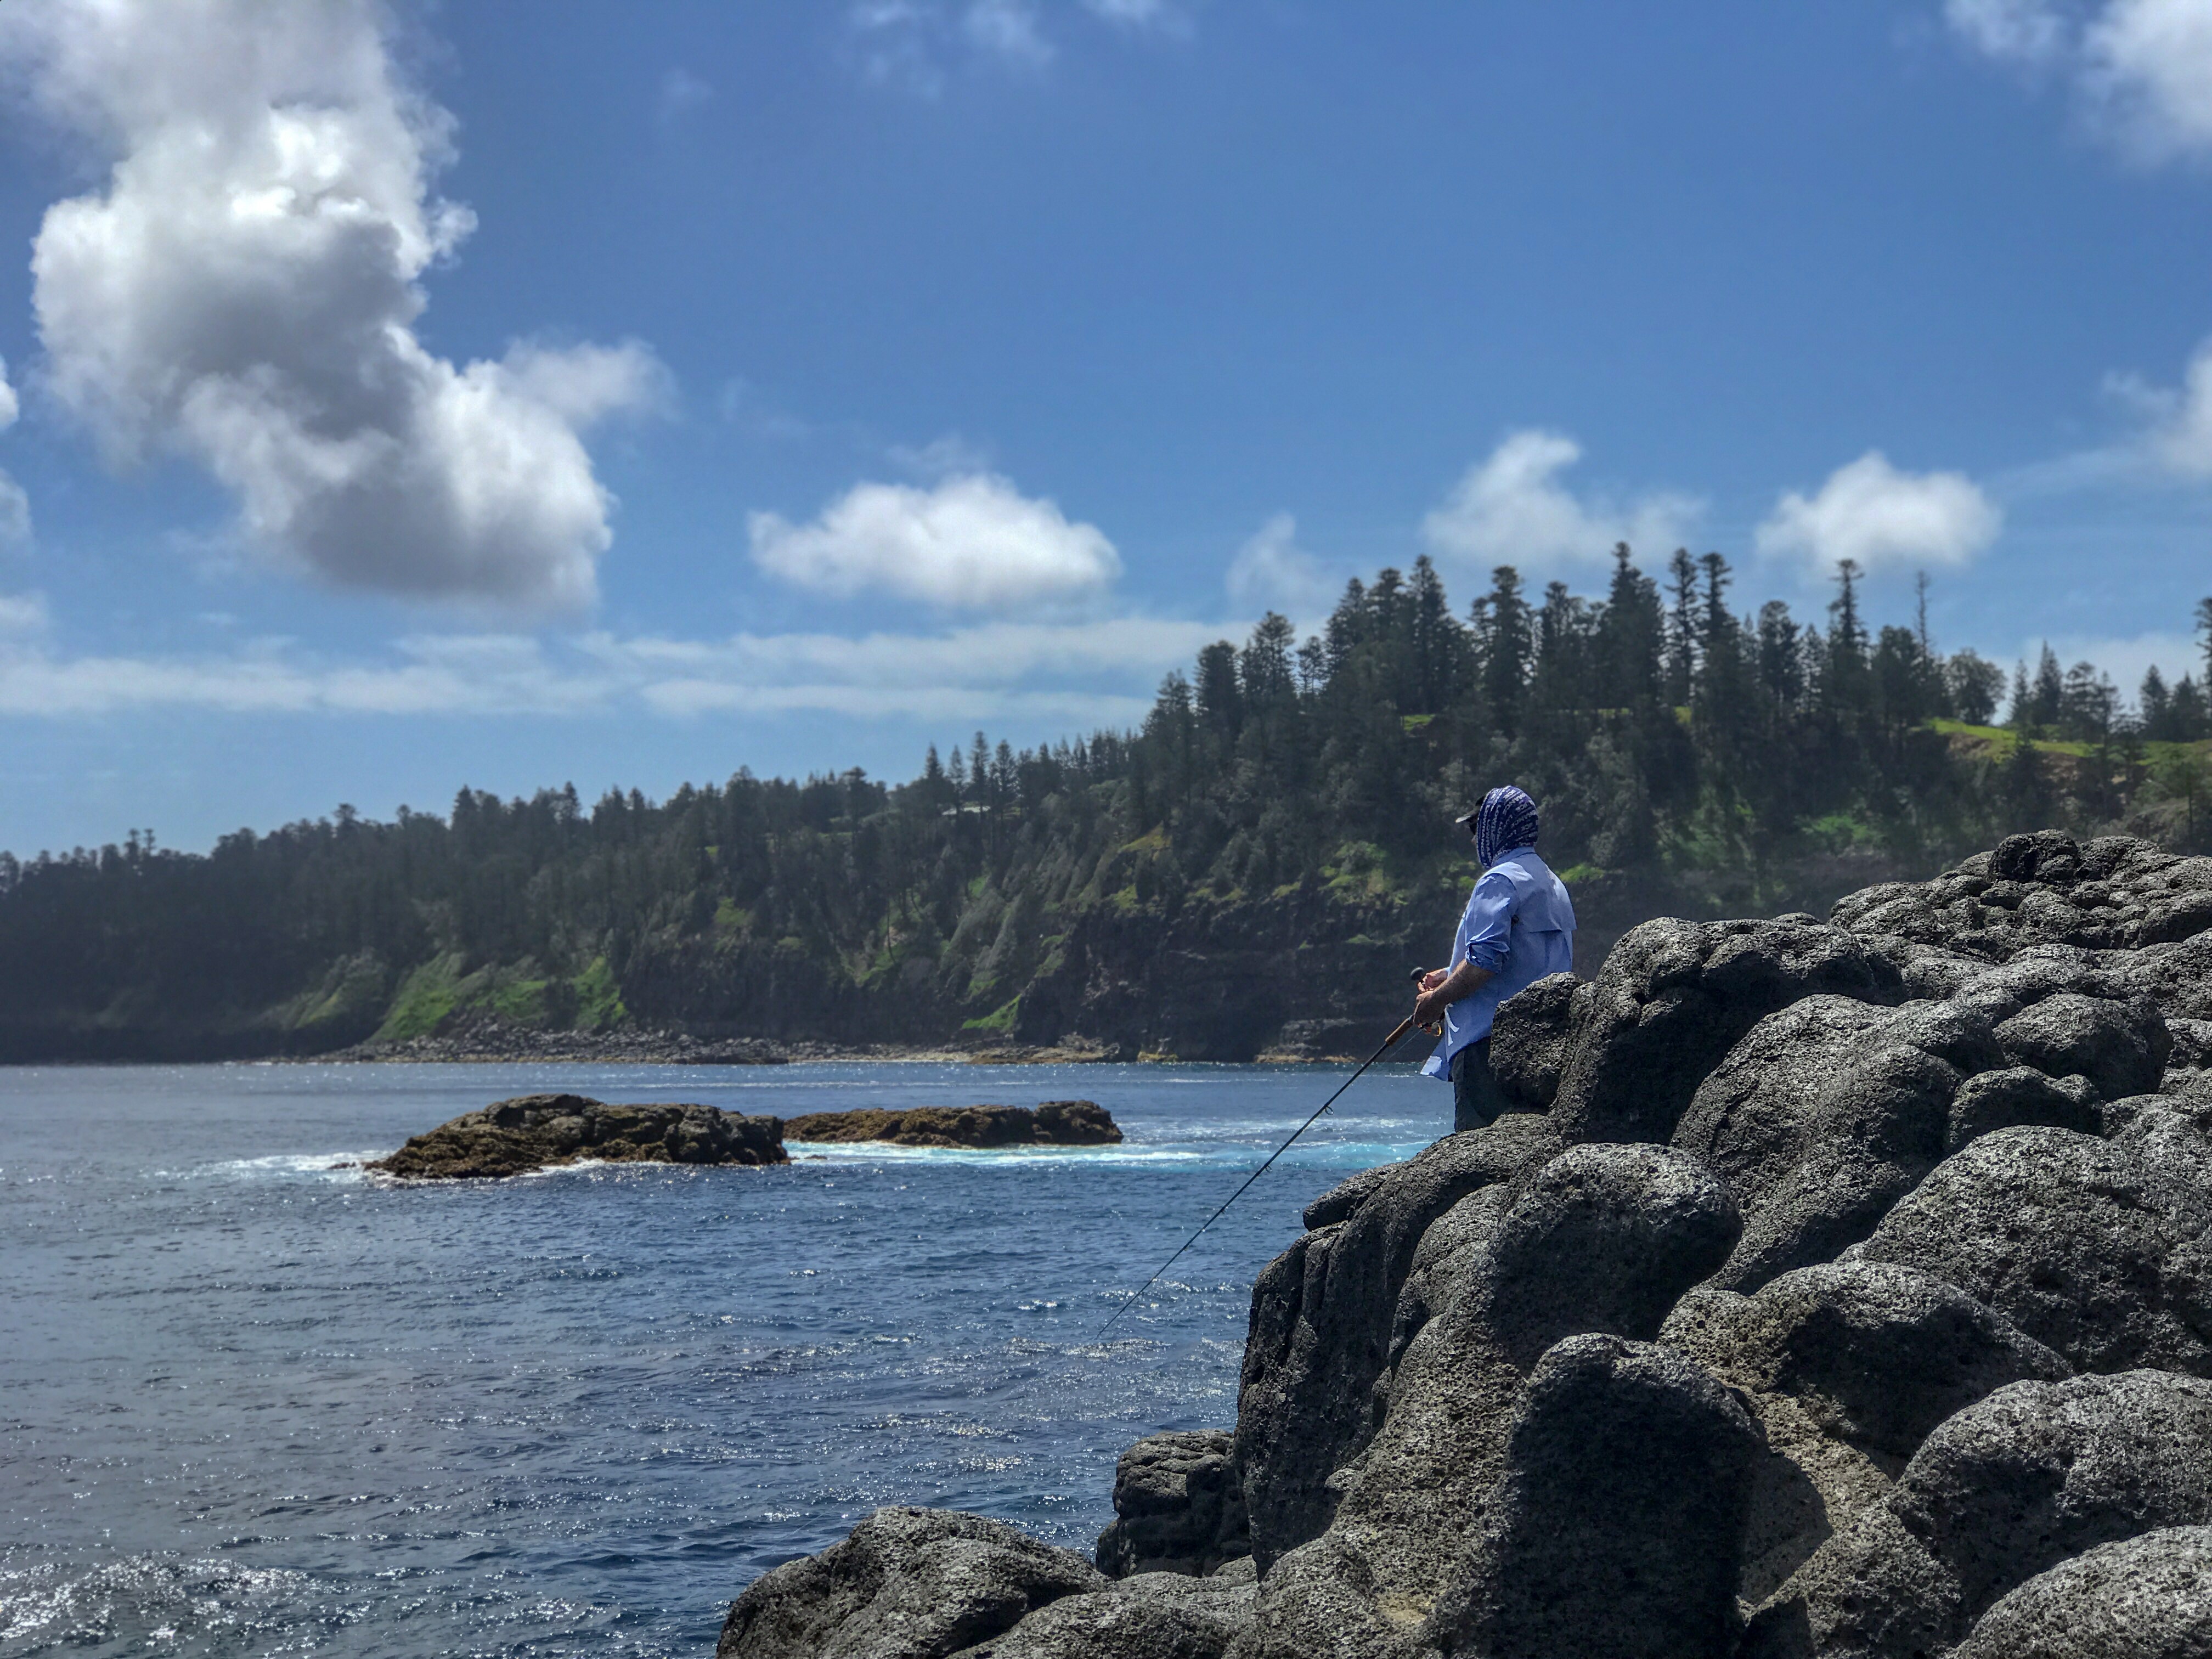 More than one way to fish at Norfolk Island